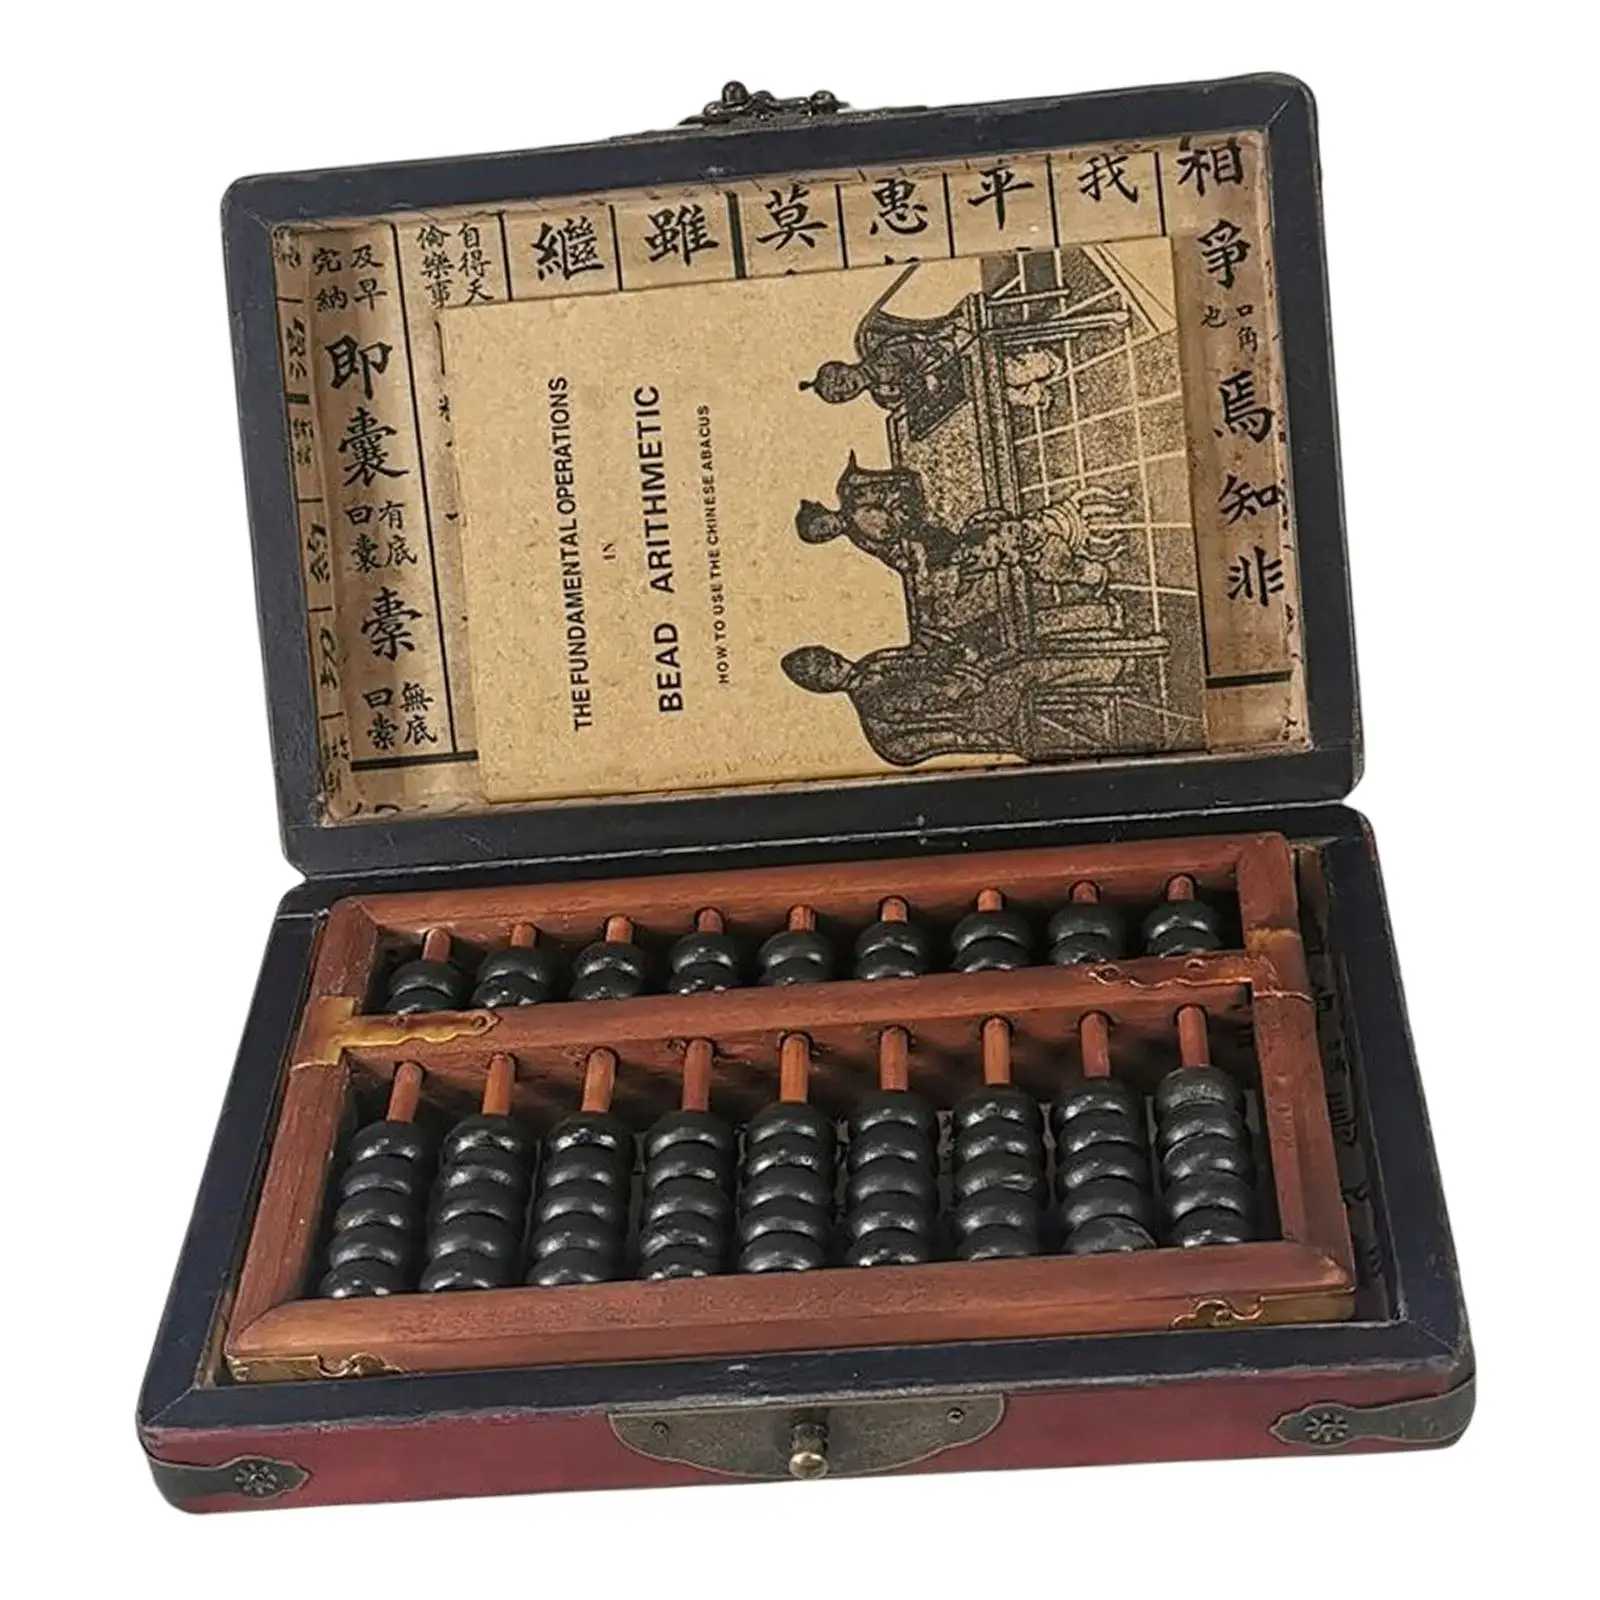 9 digits Rods Abacus with Box Educational Toys Calculator Counting Tool Chinese Wooden Bead Arithmetic Abacus for Children Kids